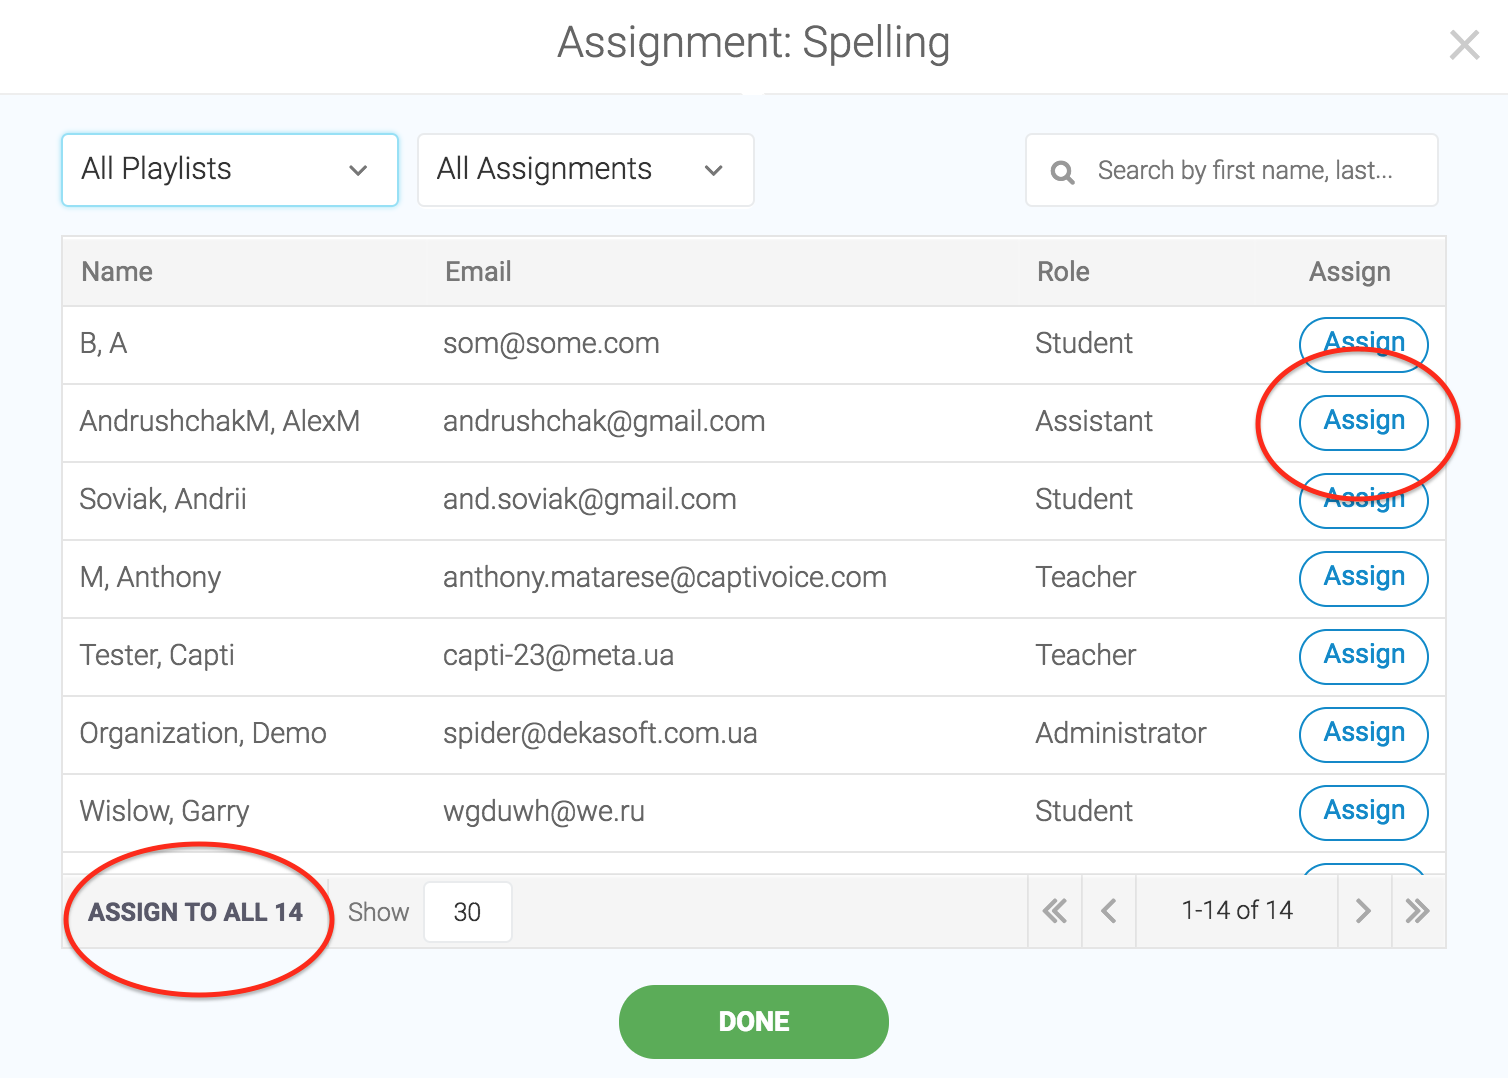 Select Assign next to the name of the user you'd like to be added to the assignment